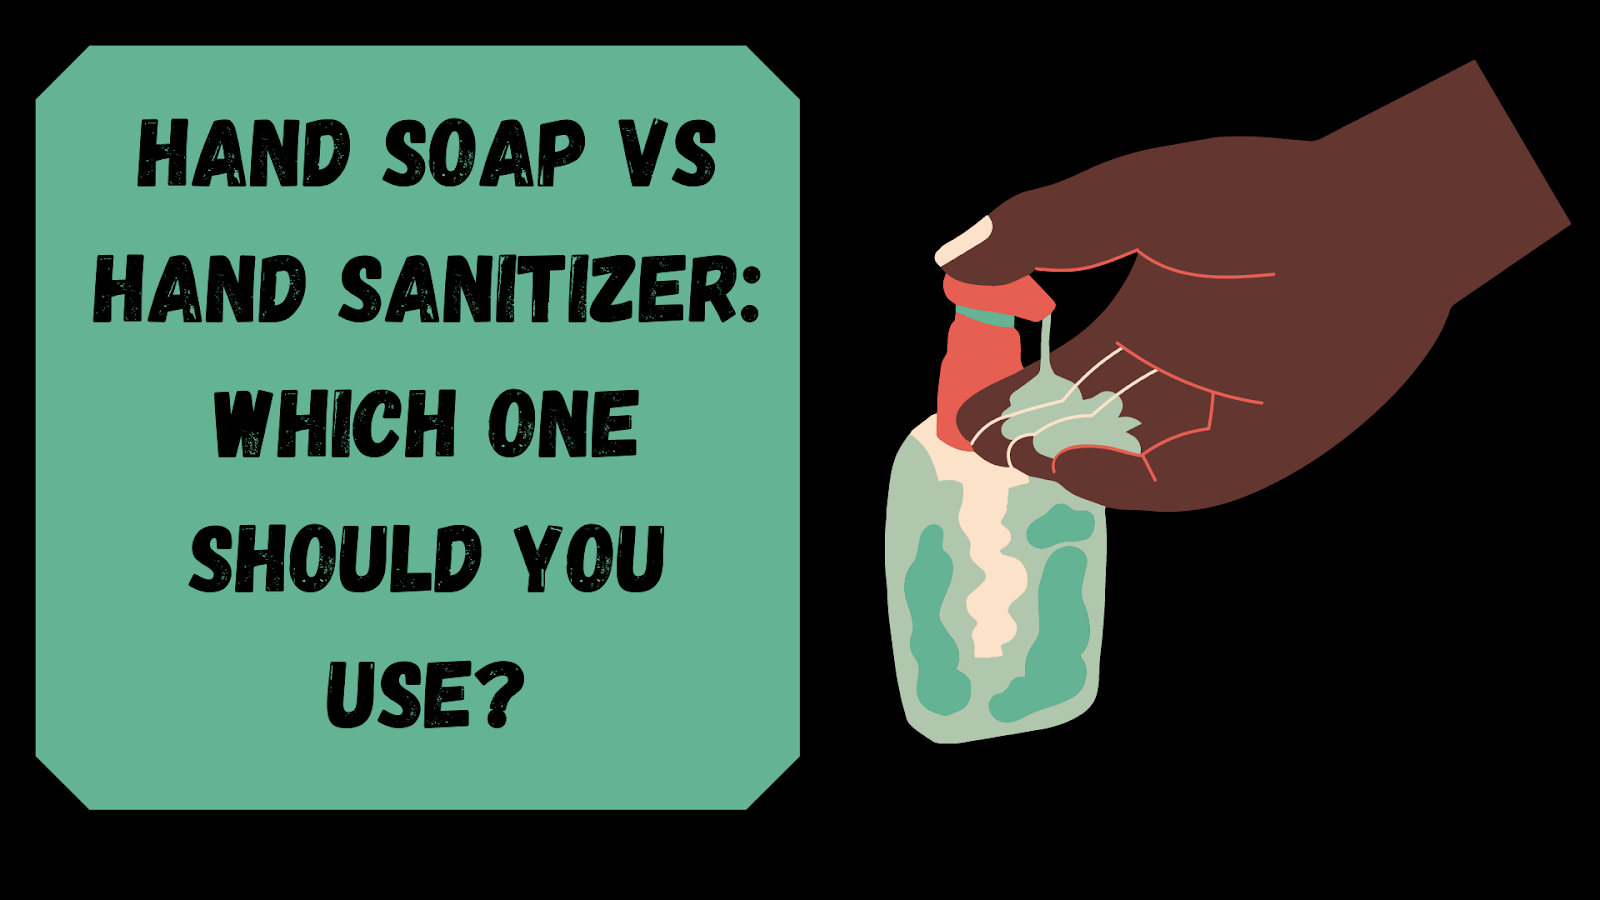 Hand Soap Vs Hand Sanitizer: Which One Should You Use?